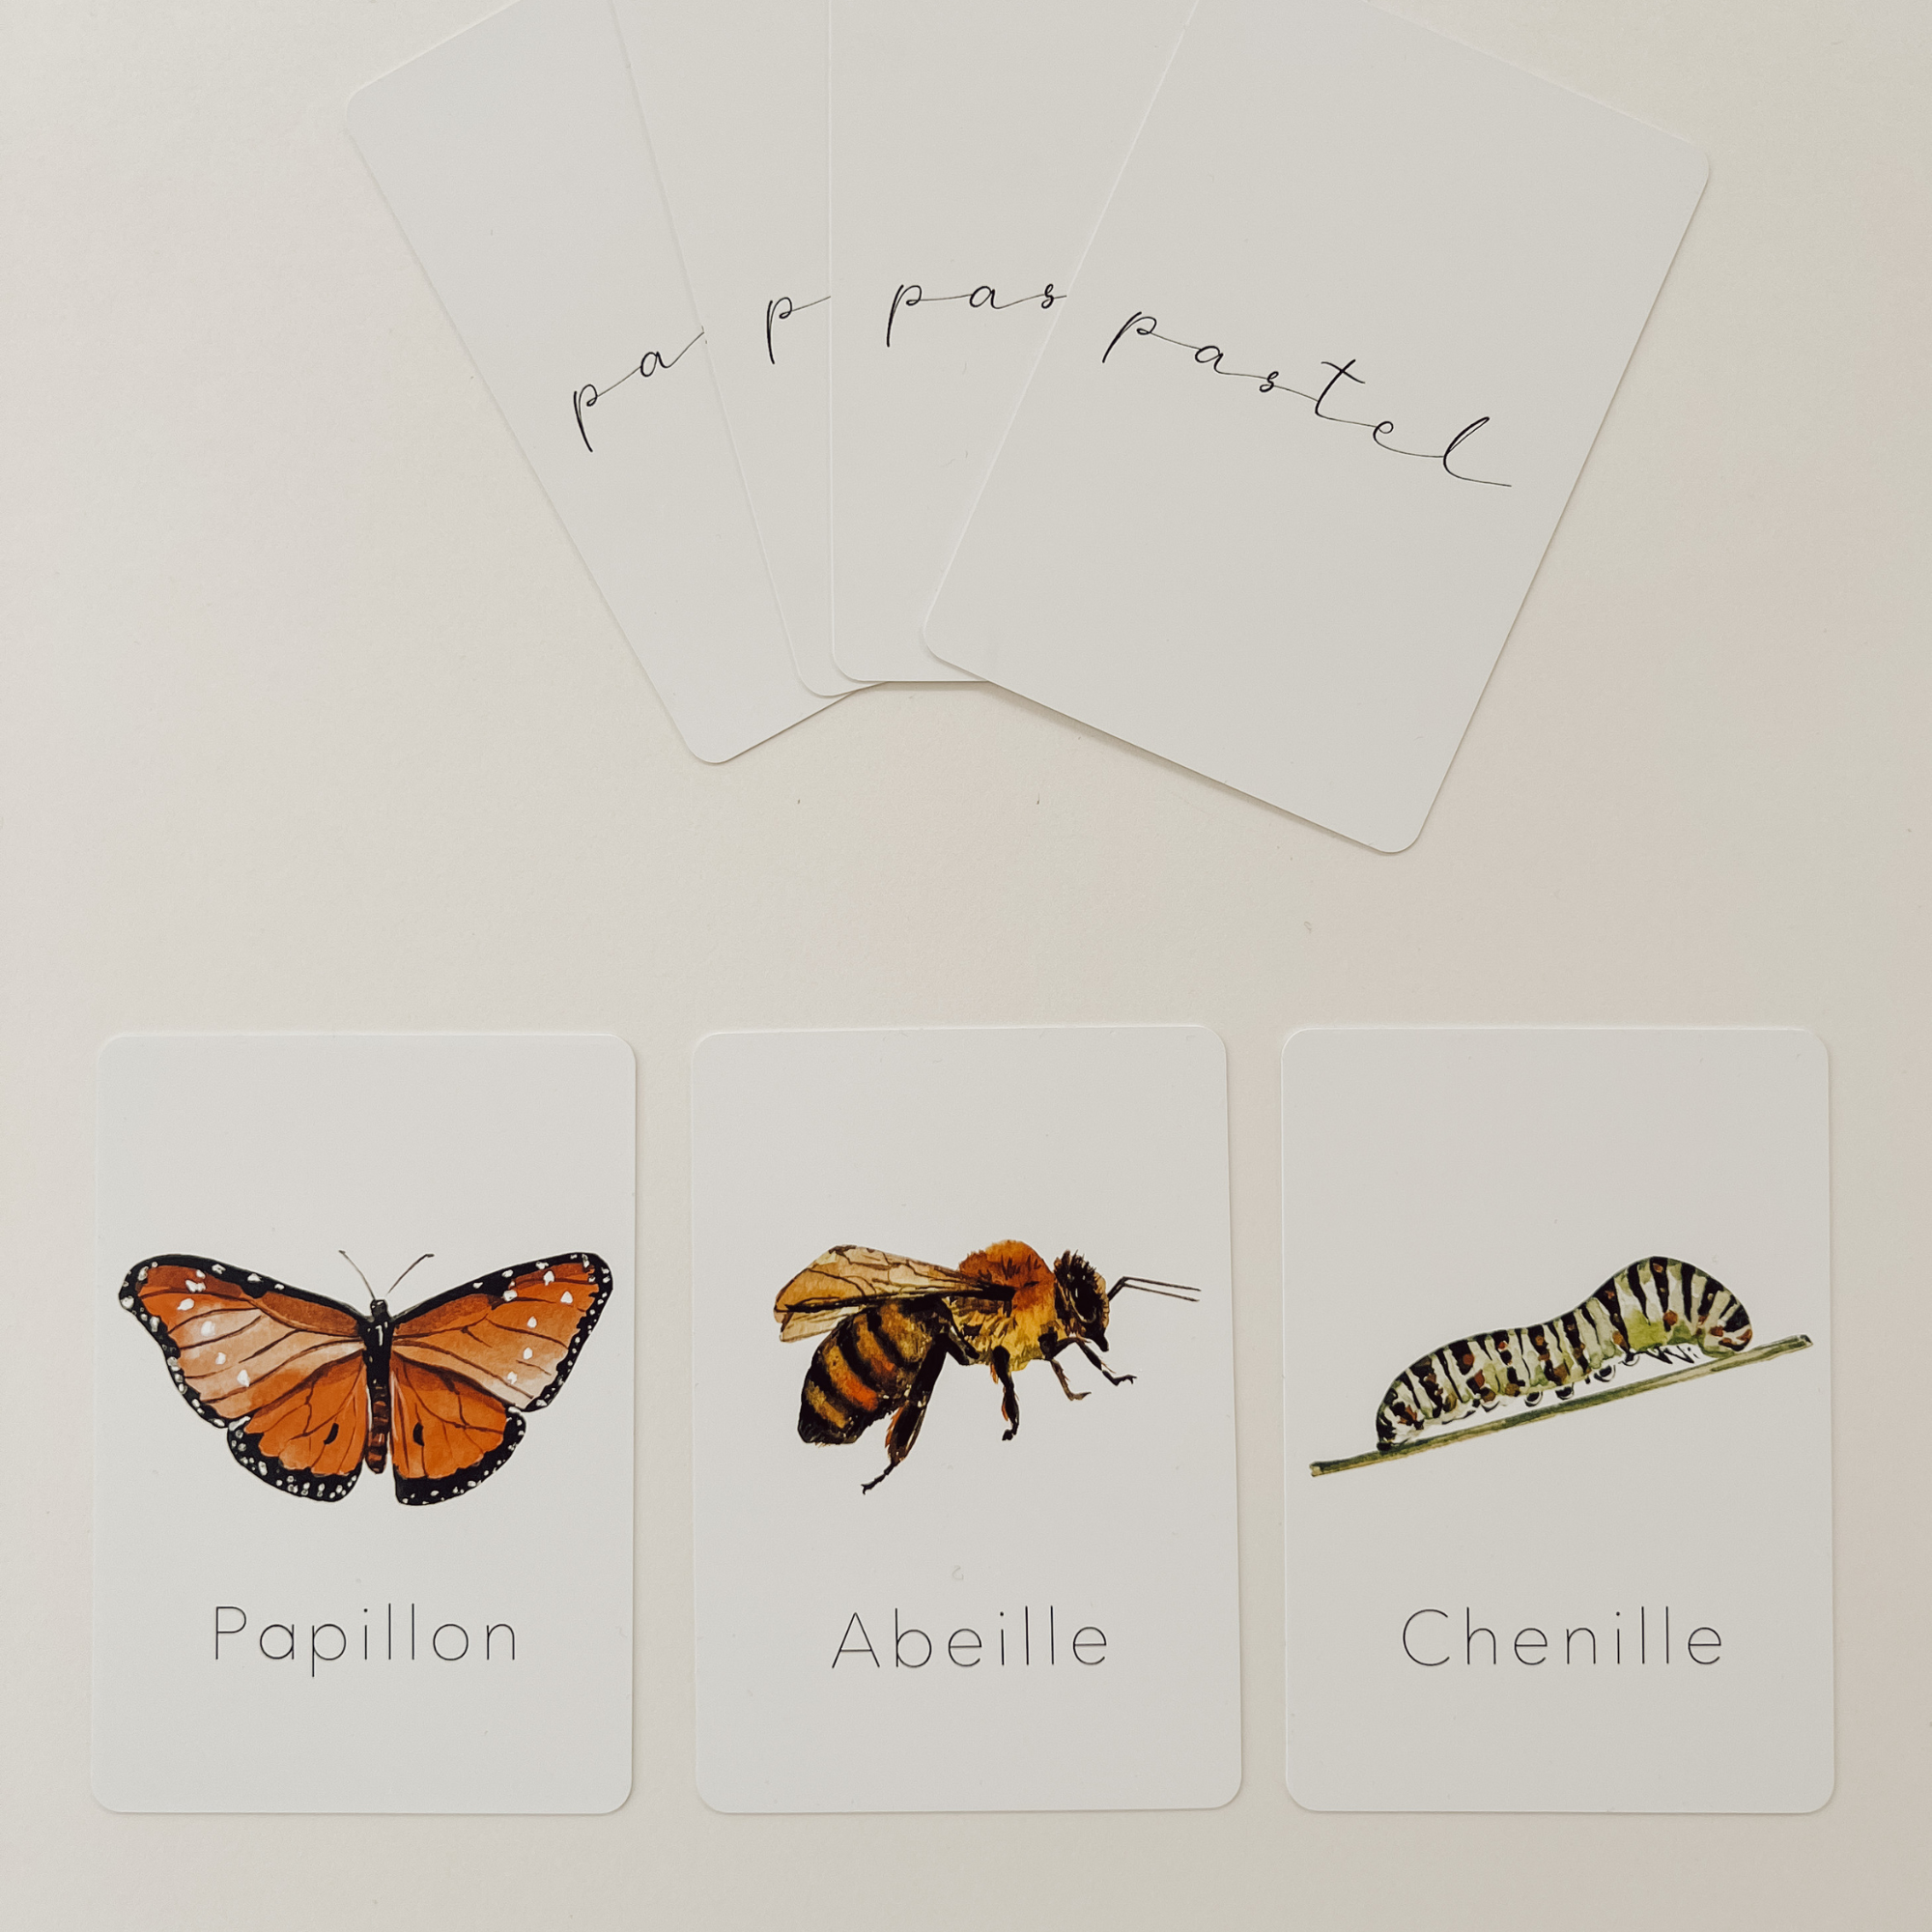 Resistant Learning Flash Cards "Insects"